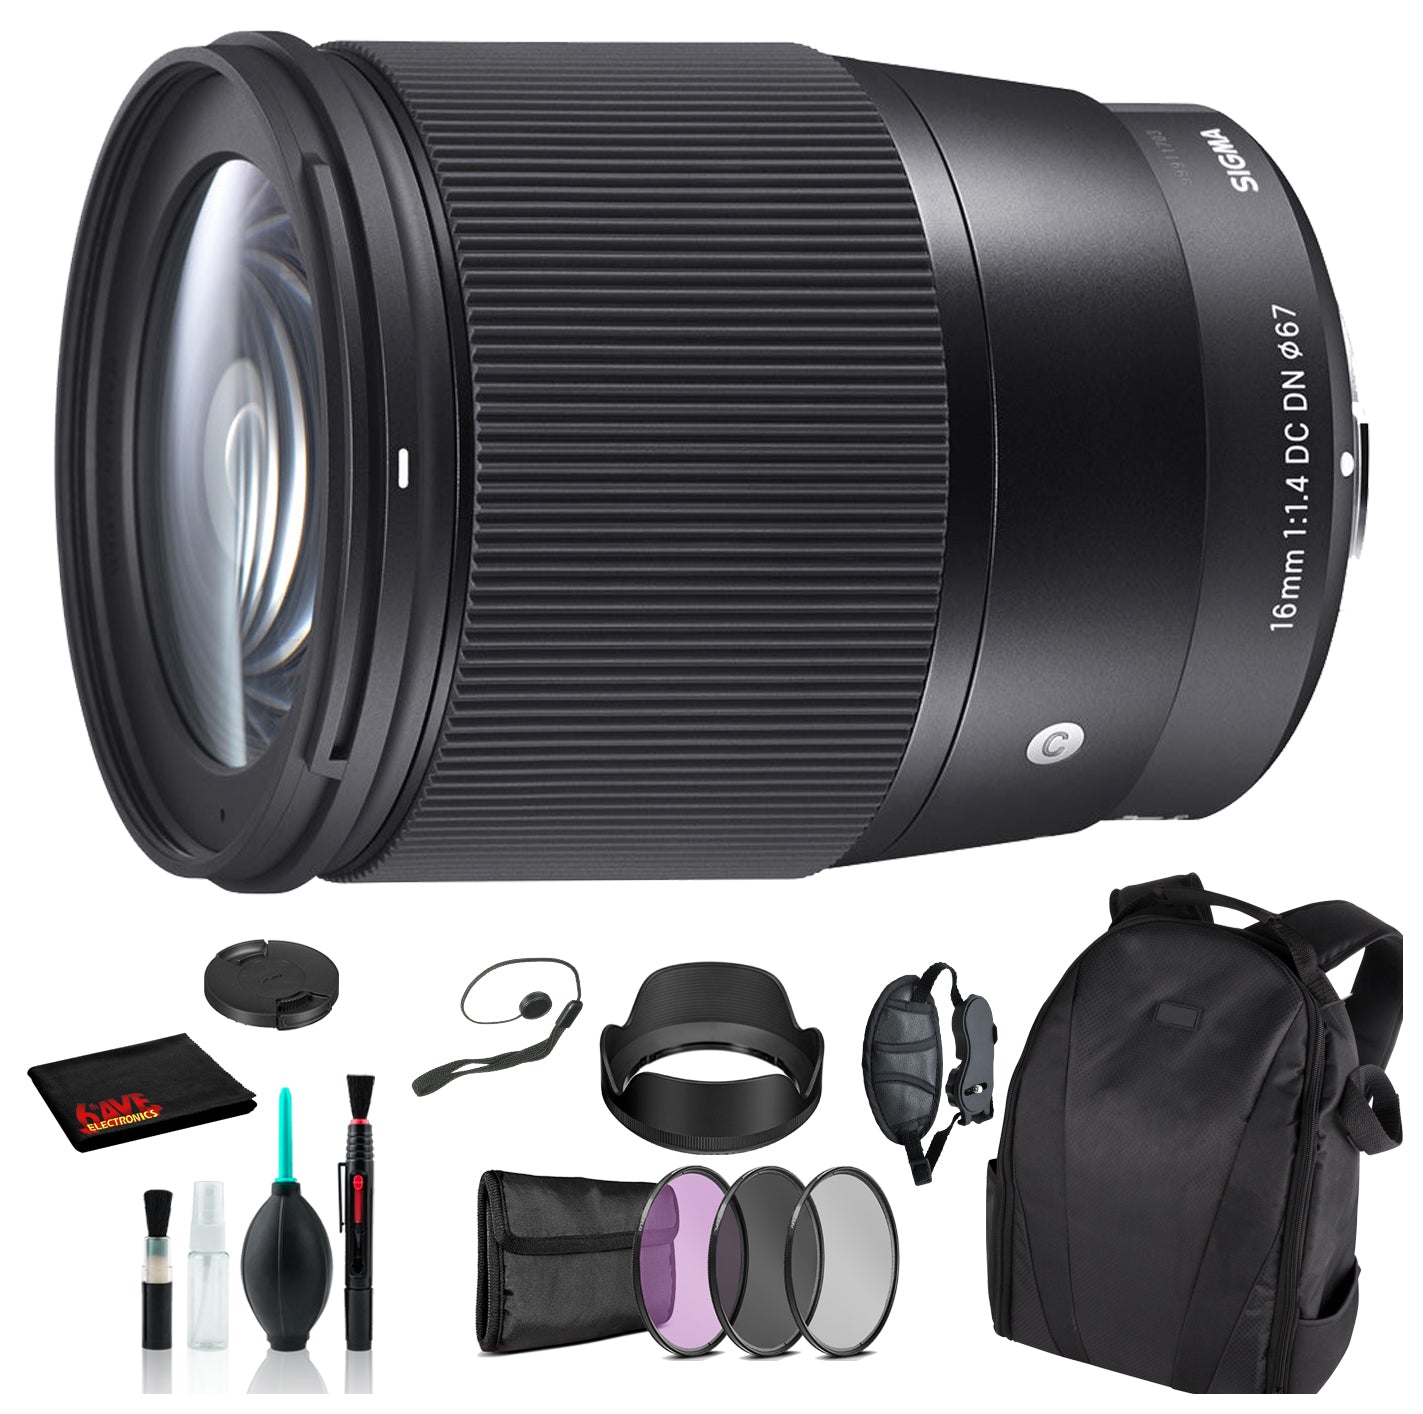 Sigma 16mm f/1.4 DC DN Contemporary Lens for Micro Four Thirds with Essential Bundle: Backpack + 3PC Filter + More